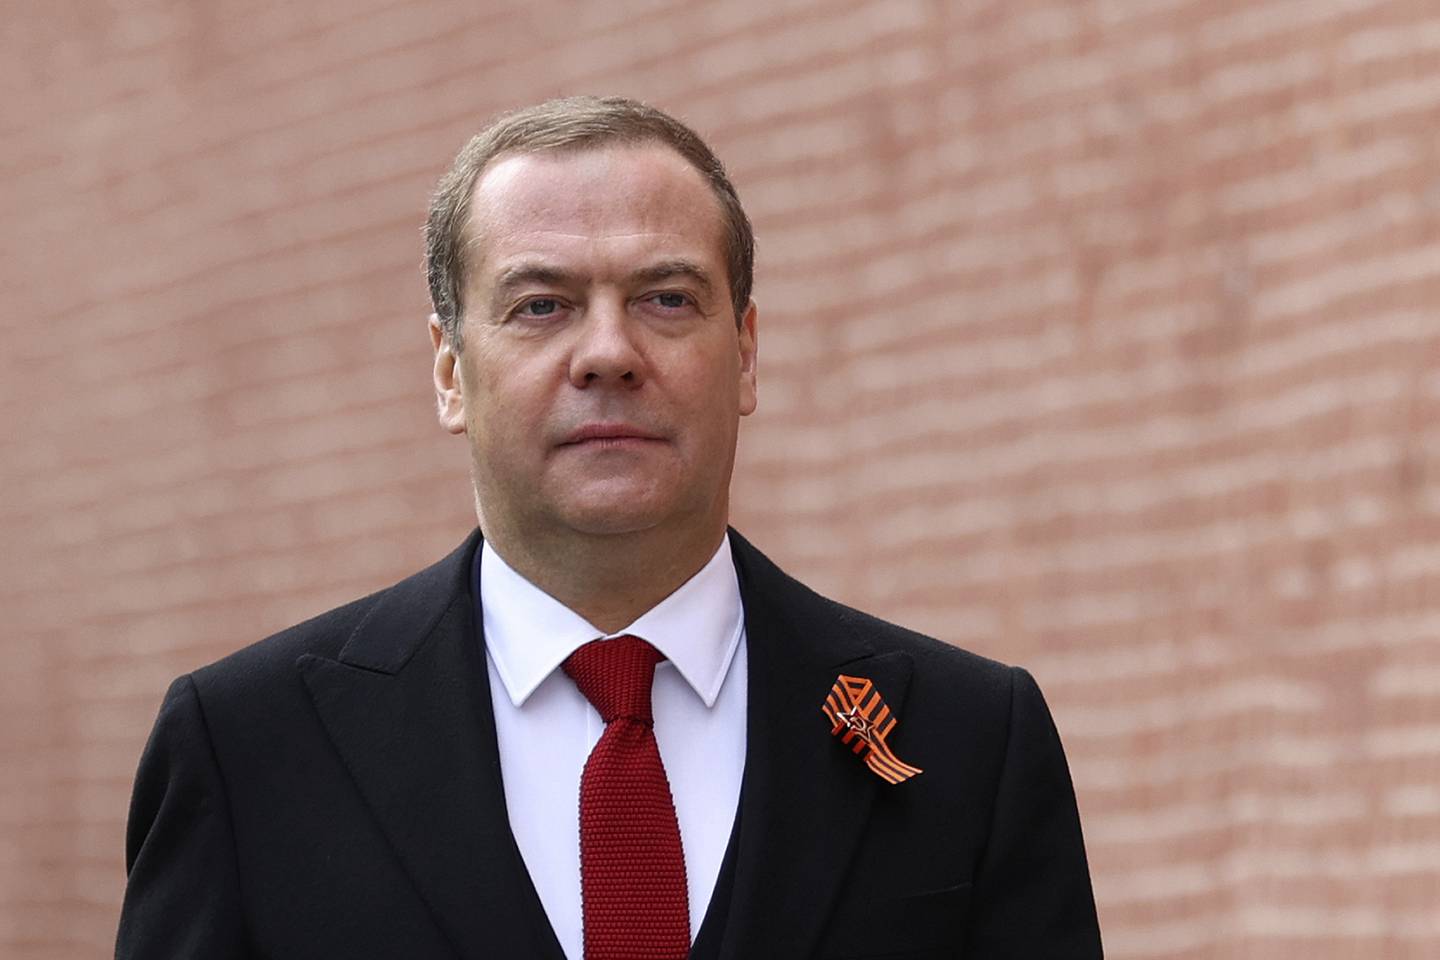 Deputy Head of Russia's Security Council Dmitry Medvedev arrives to attend a military parade on Victory Day, which marks the 77th anniversary of the victory over Nazi Germany in World War Two in Red Square in Moscow, Russia, Monday, May 9, 2022. Medvedev, the deputy head of Russia's Security Council chaired by President Vladimir Putin, said Thursday that growing Western arms supplies to Ukraine and training for its troops have "increased the probability that an ongoing proxy war will turn into an open and direct conflict between NATO and Russia." (Yekaterina Shtukina, Sputnik, Government Pool Photo via AP)